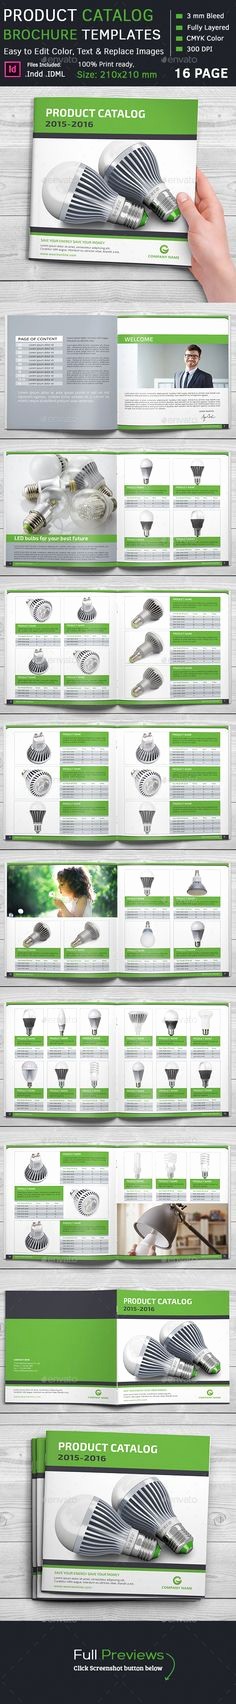 Product Catalog Template Free Download Unique Layout Verily Magazine Desing Editorial